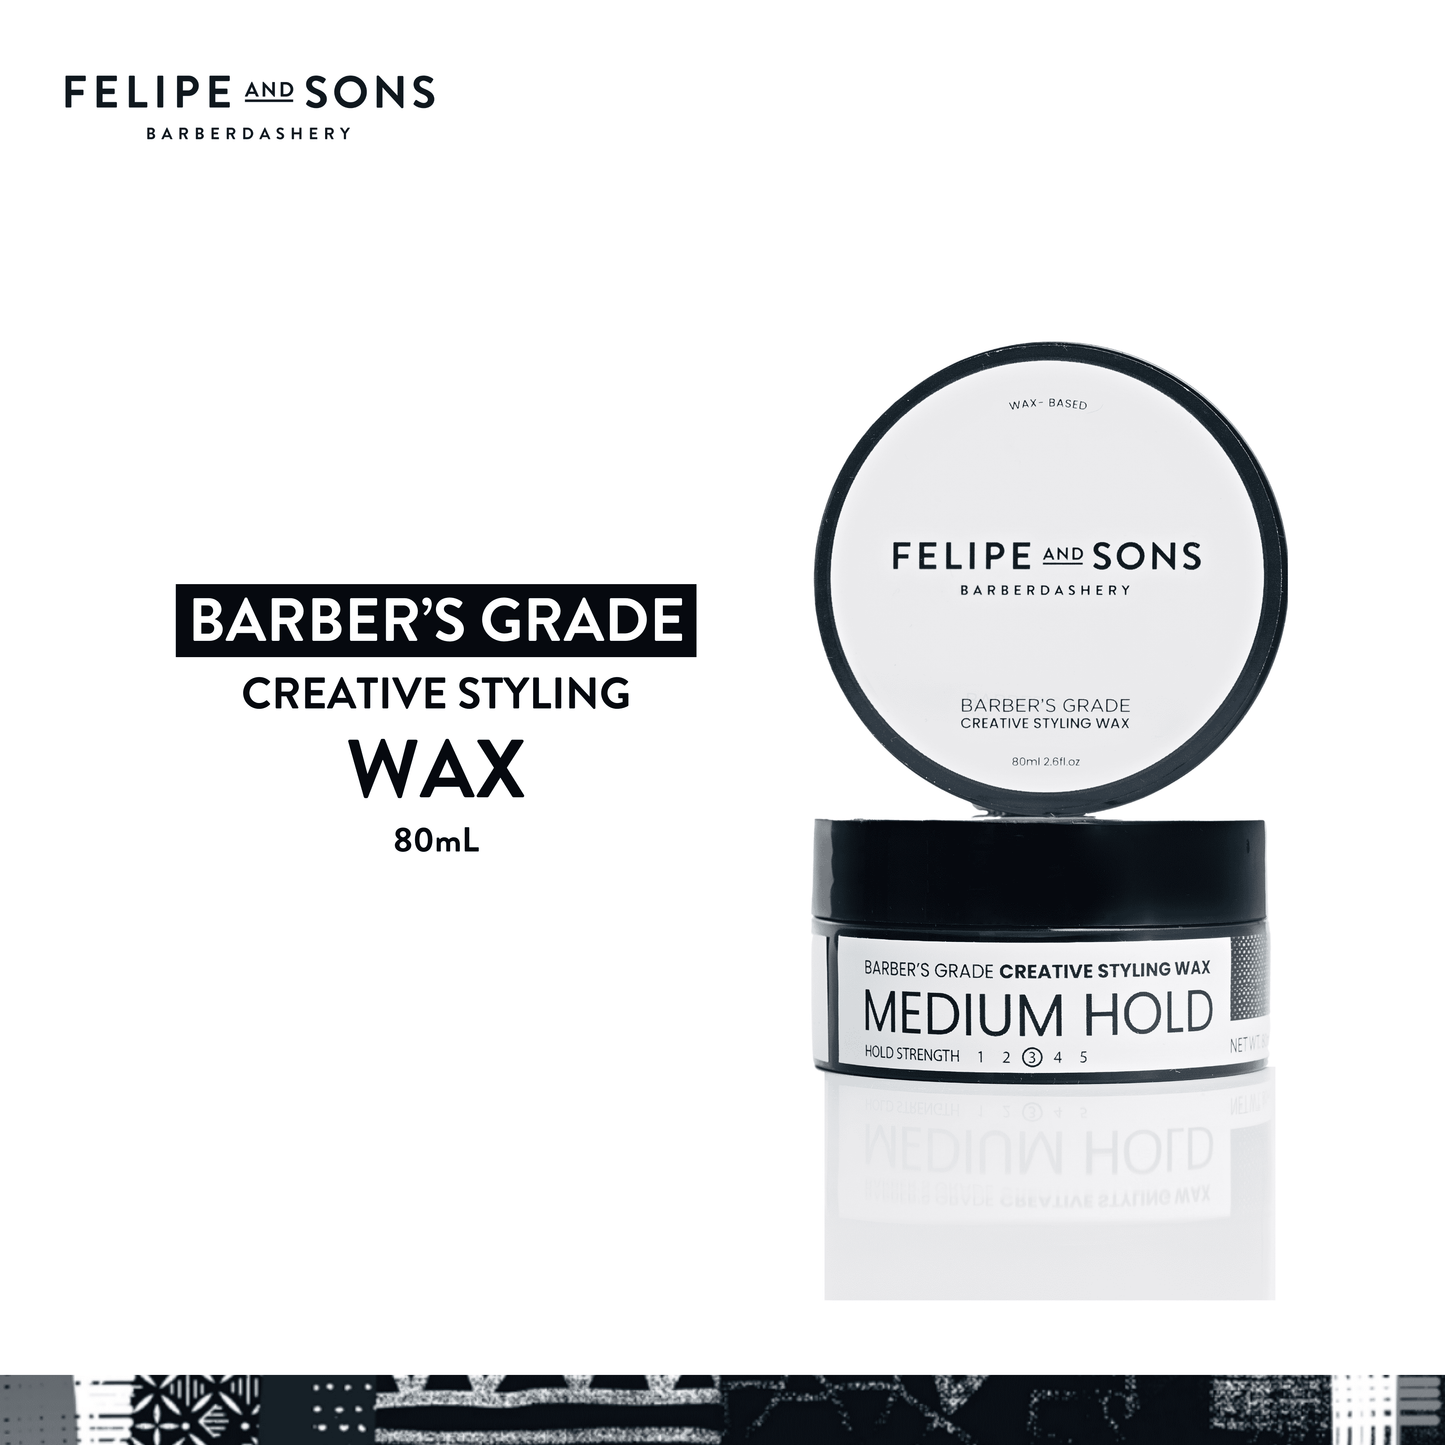 Felipe and Sons Barber’s Grade Creative Styling Wax 80g